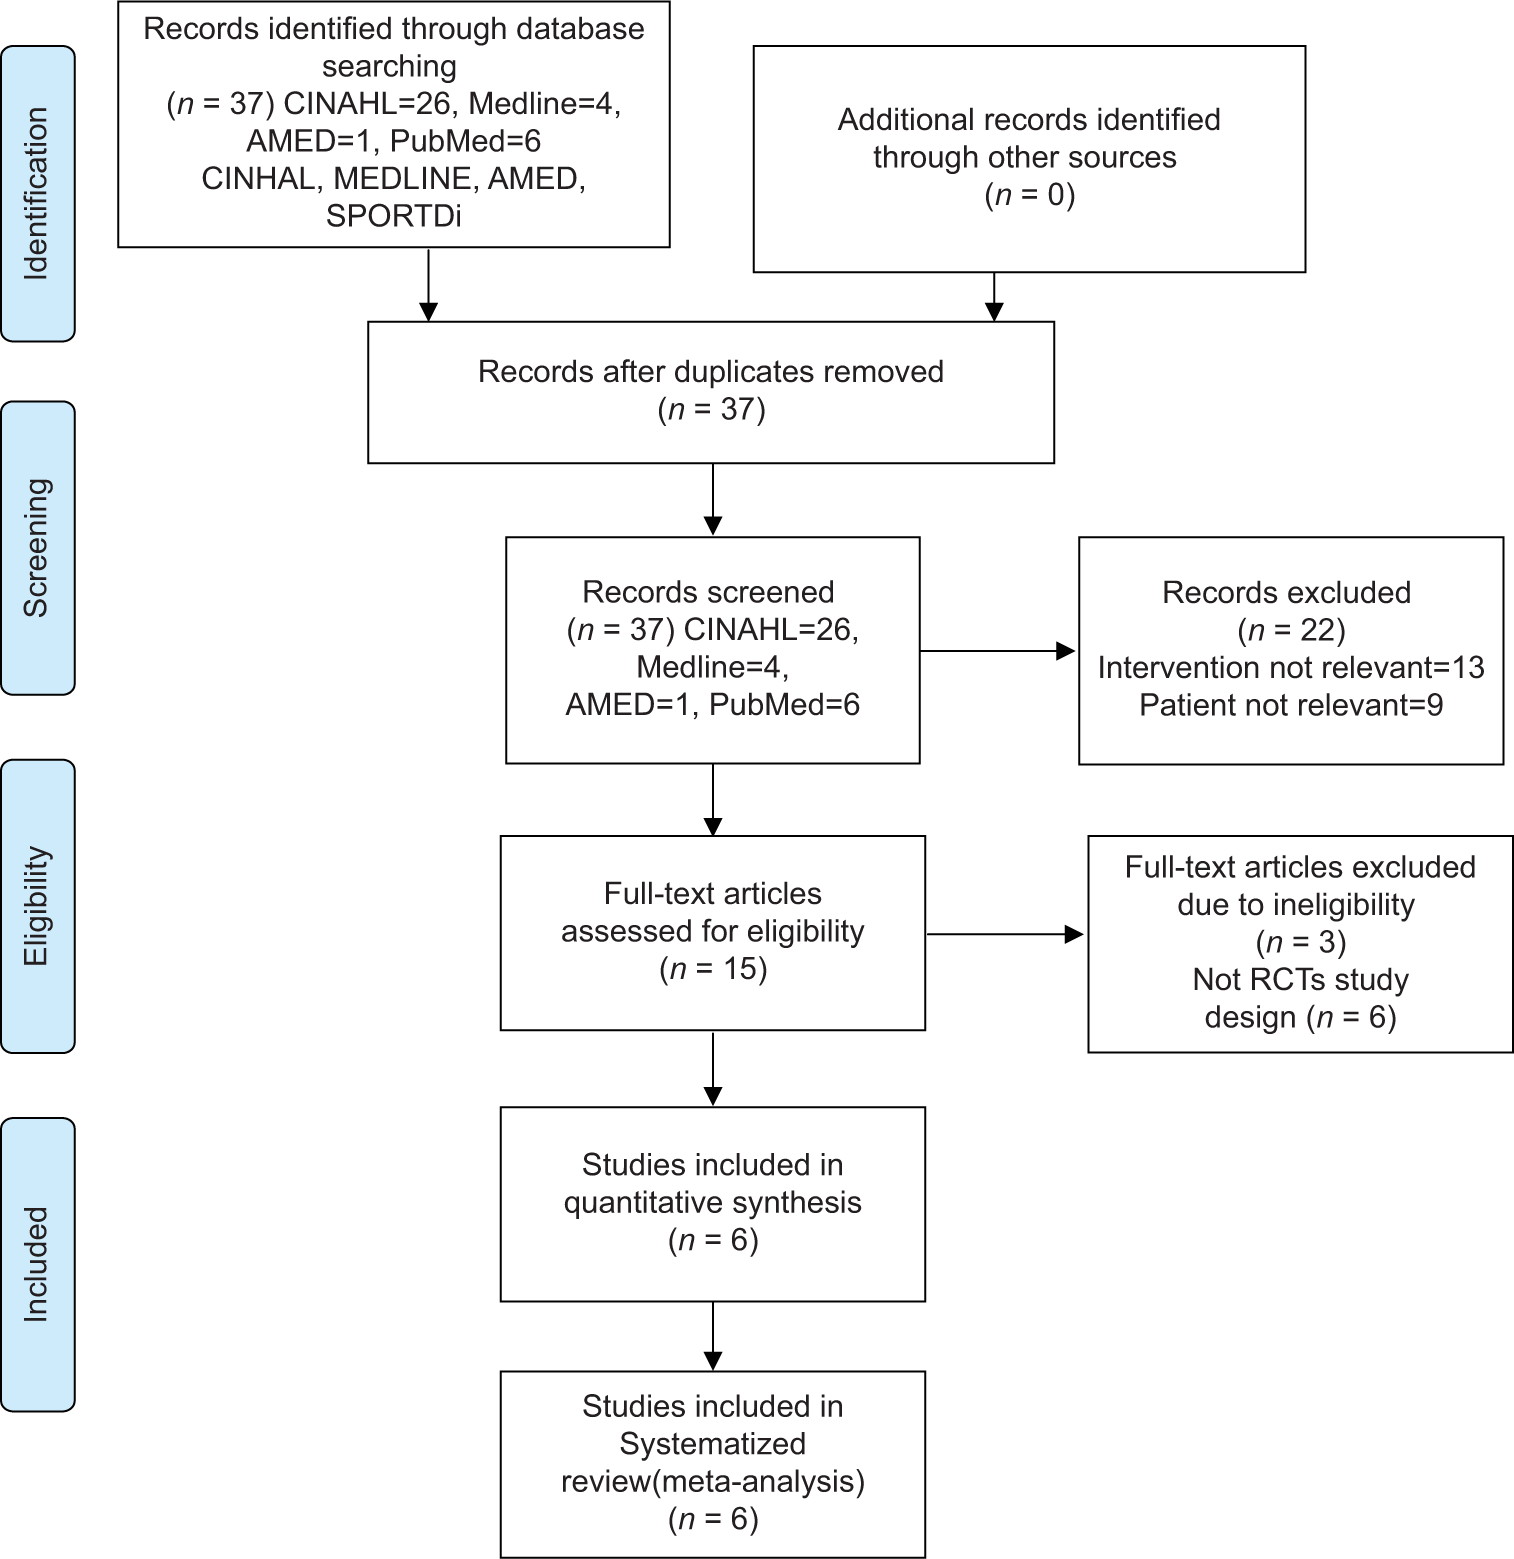 PRISMA flow diagram. PRISMA: Preferred Reporting Items for Systematic Reviews and Meta-Analyses. RCTs: Randomized controlled trials.